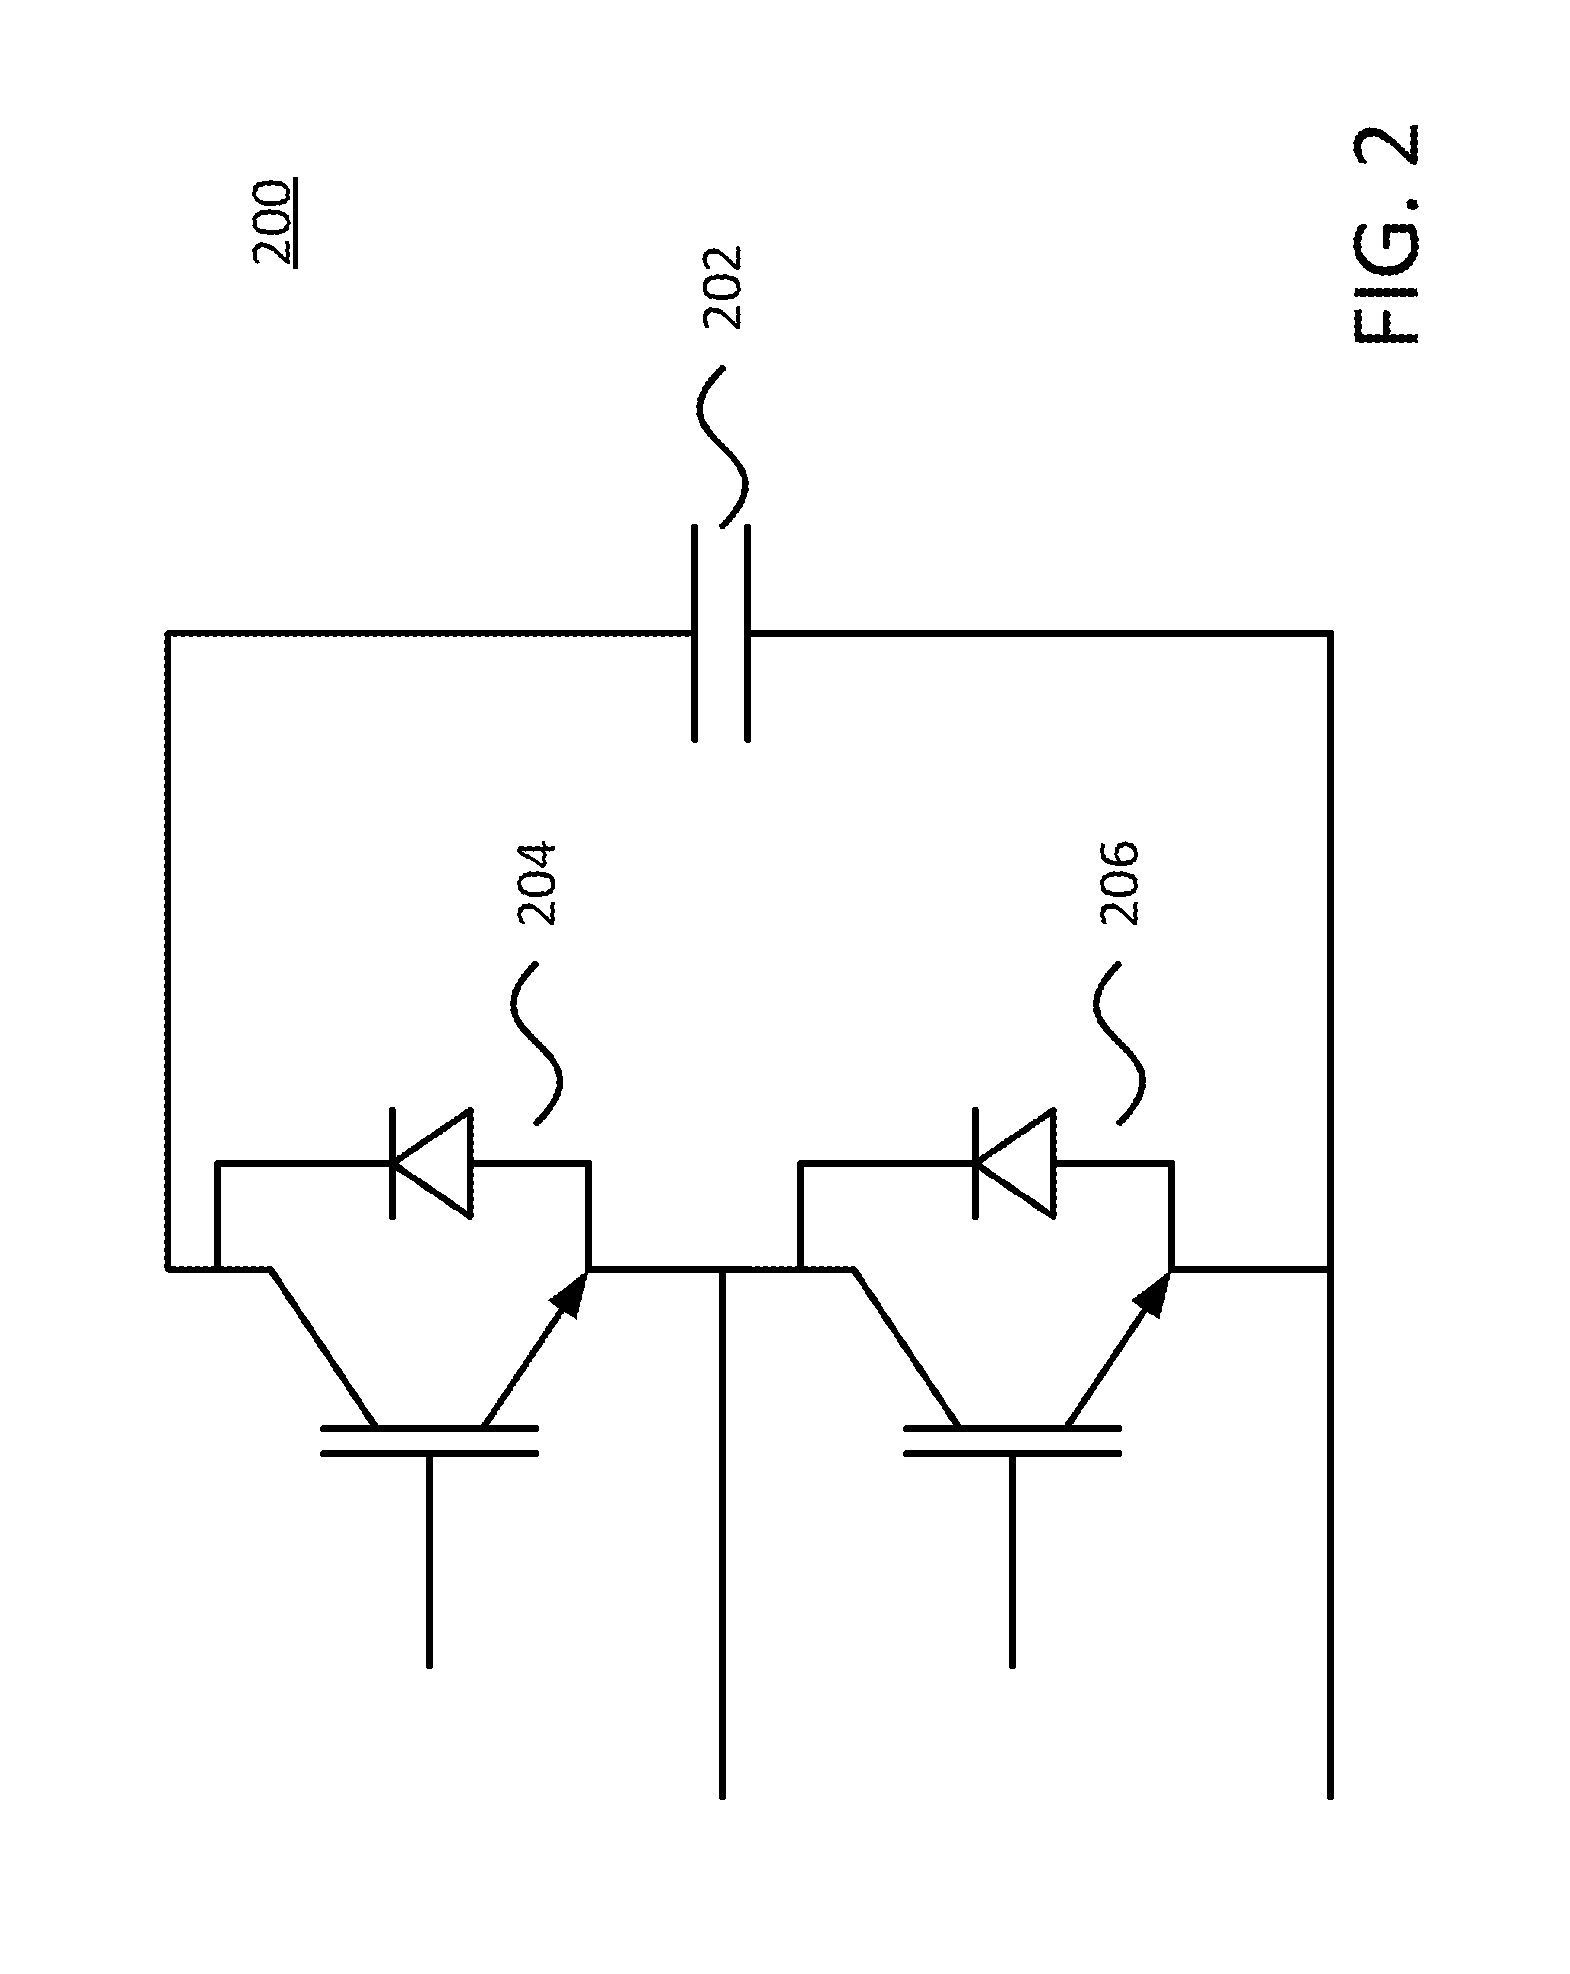 Semiconductor Device for Hybrid Energy Storage Systems